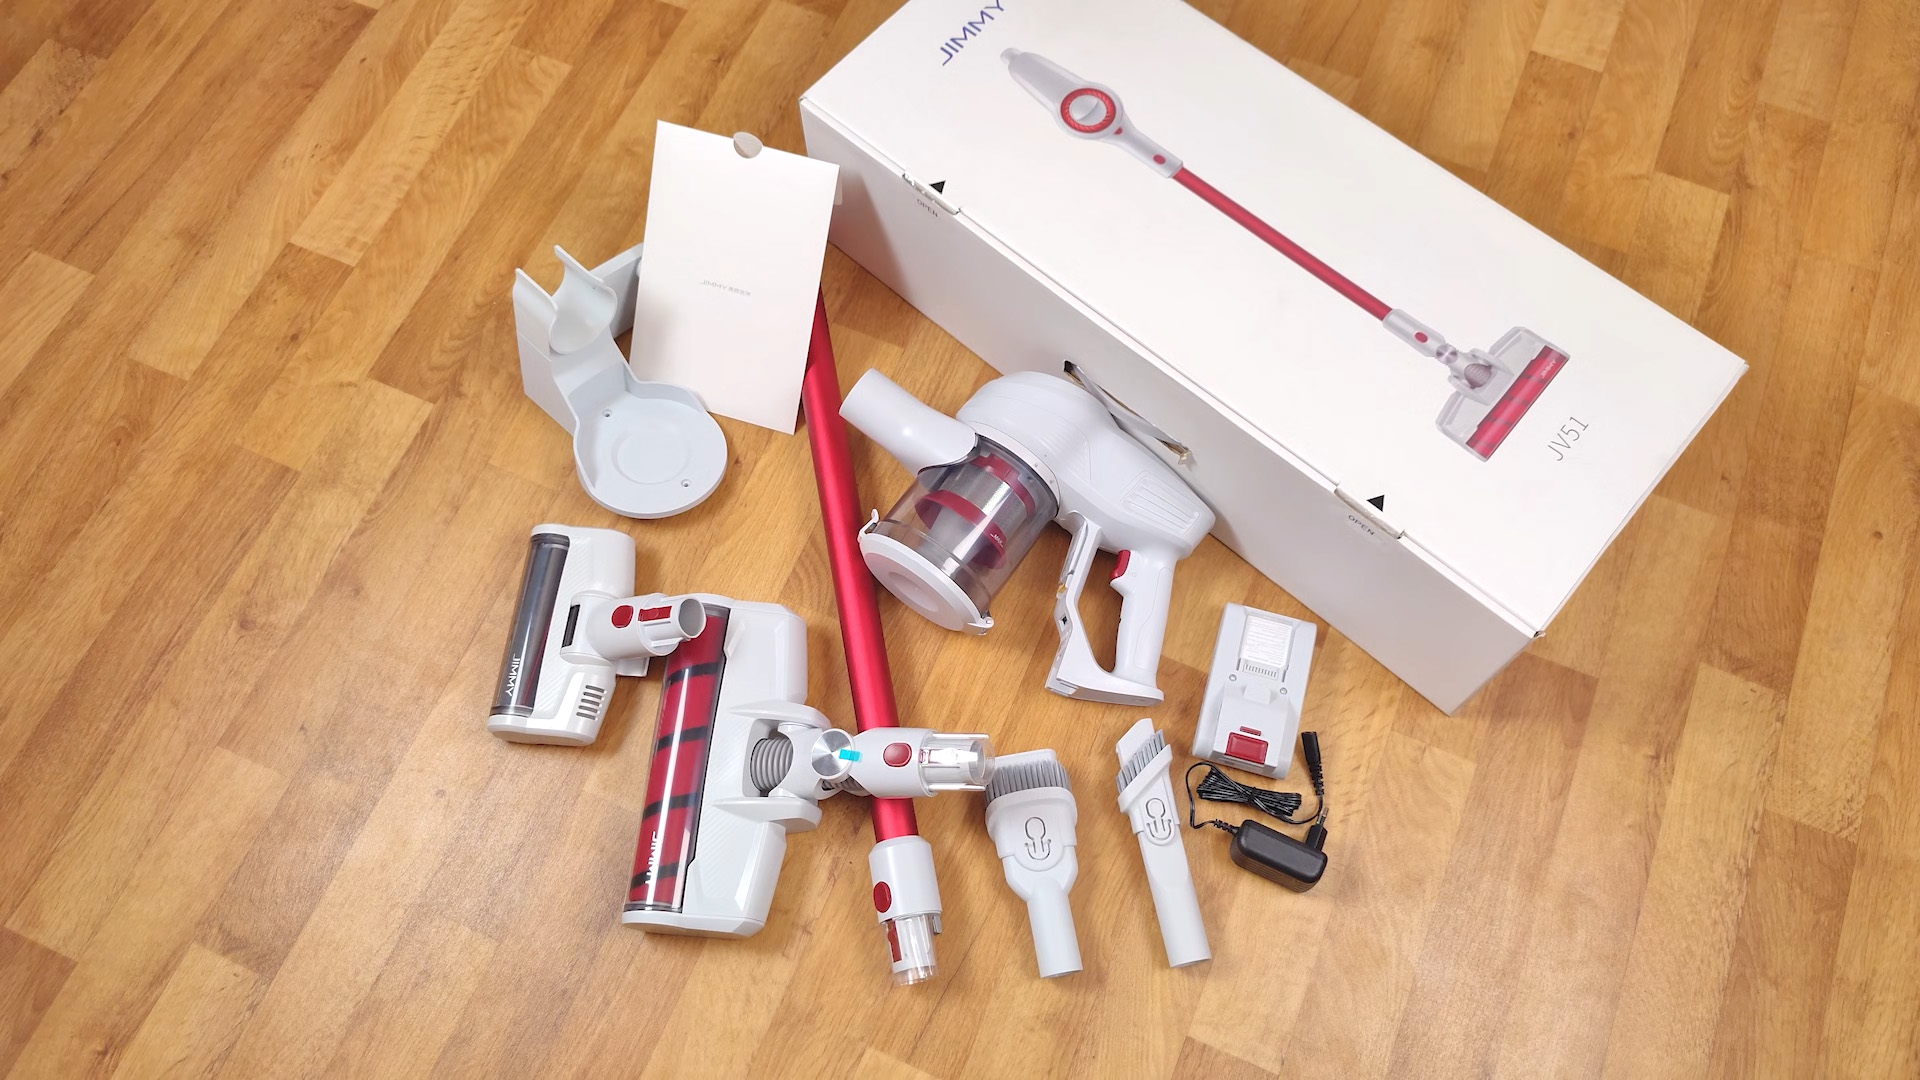 Jimmy JV51 cordless vacuum cleaner review - equipment